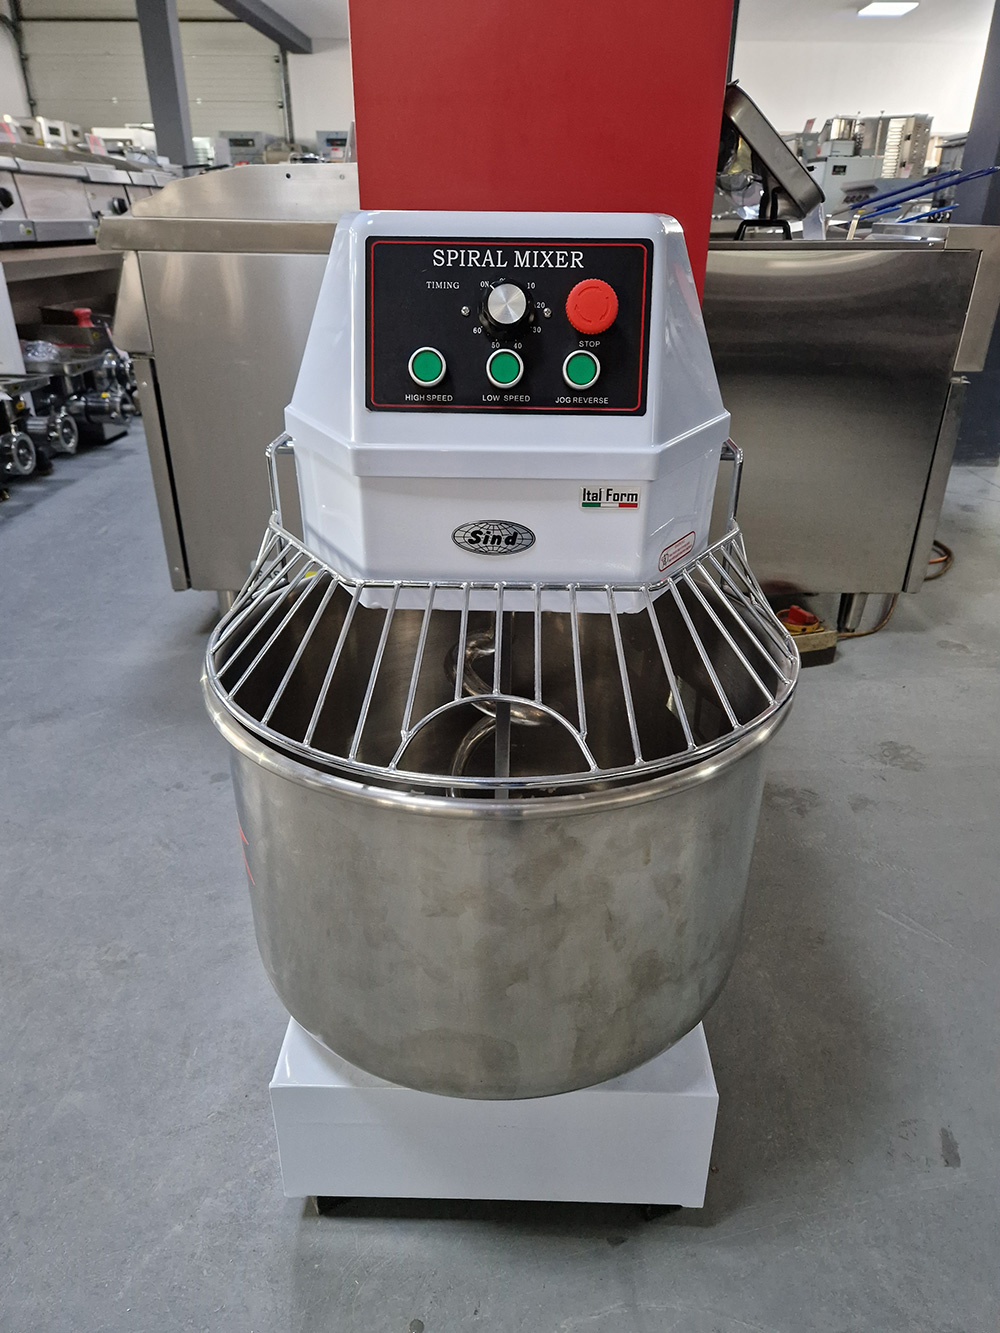 Spiral mixer 40 liters BW40 - Ital Form